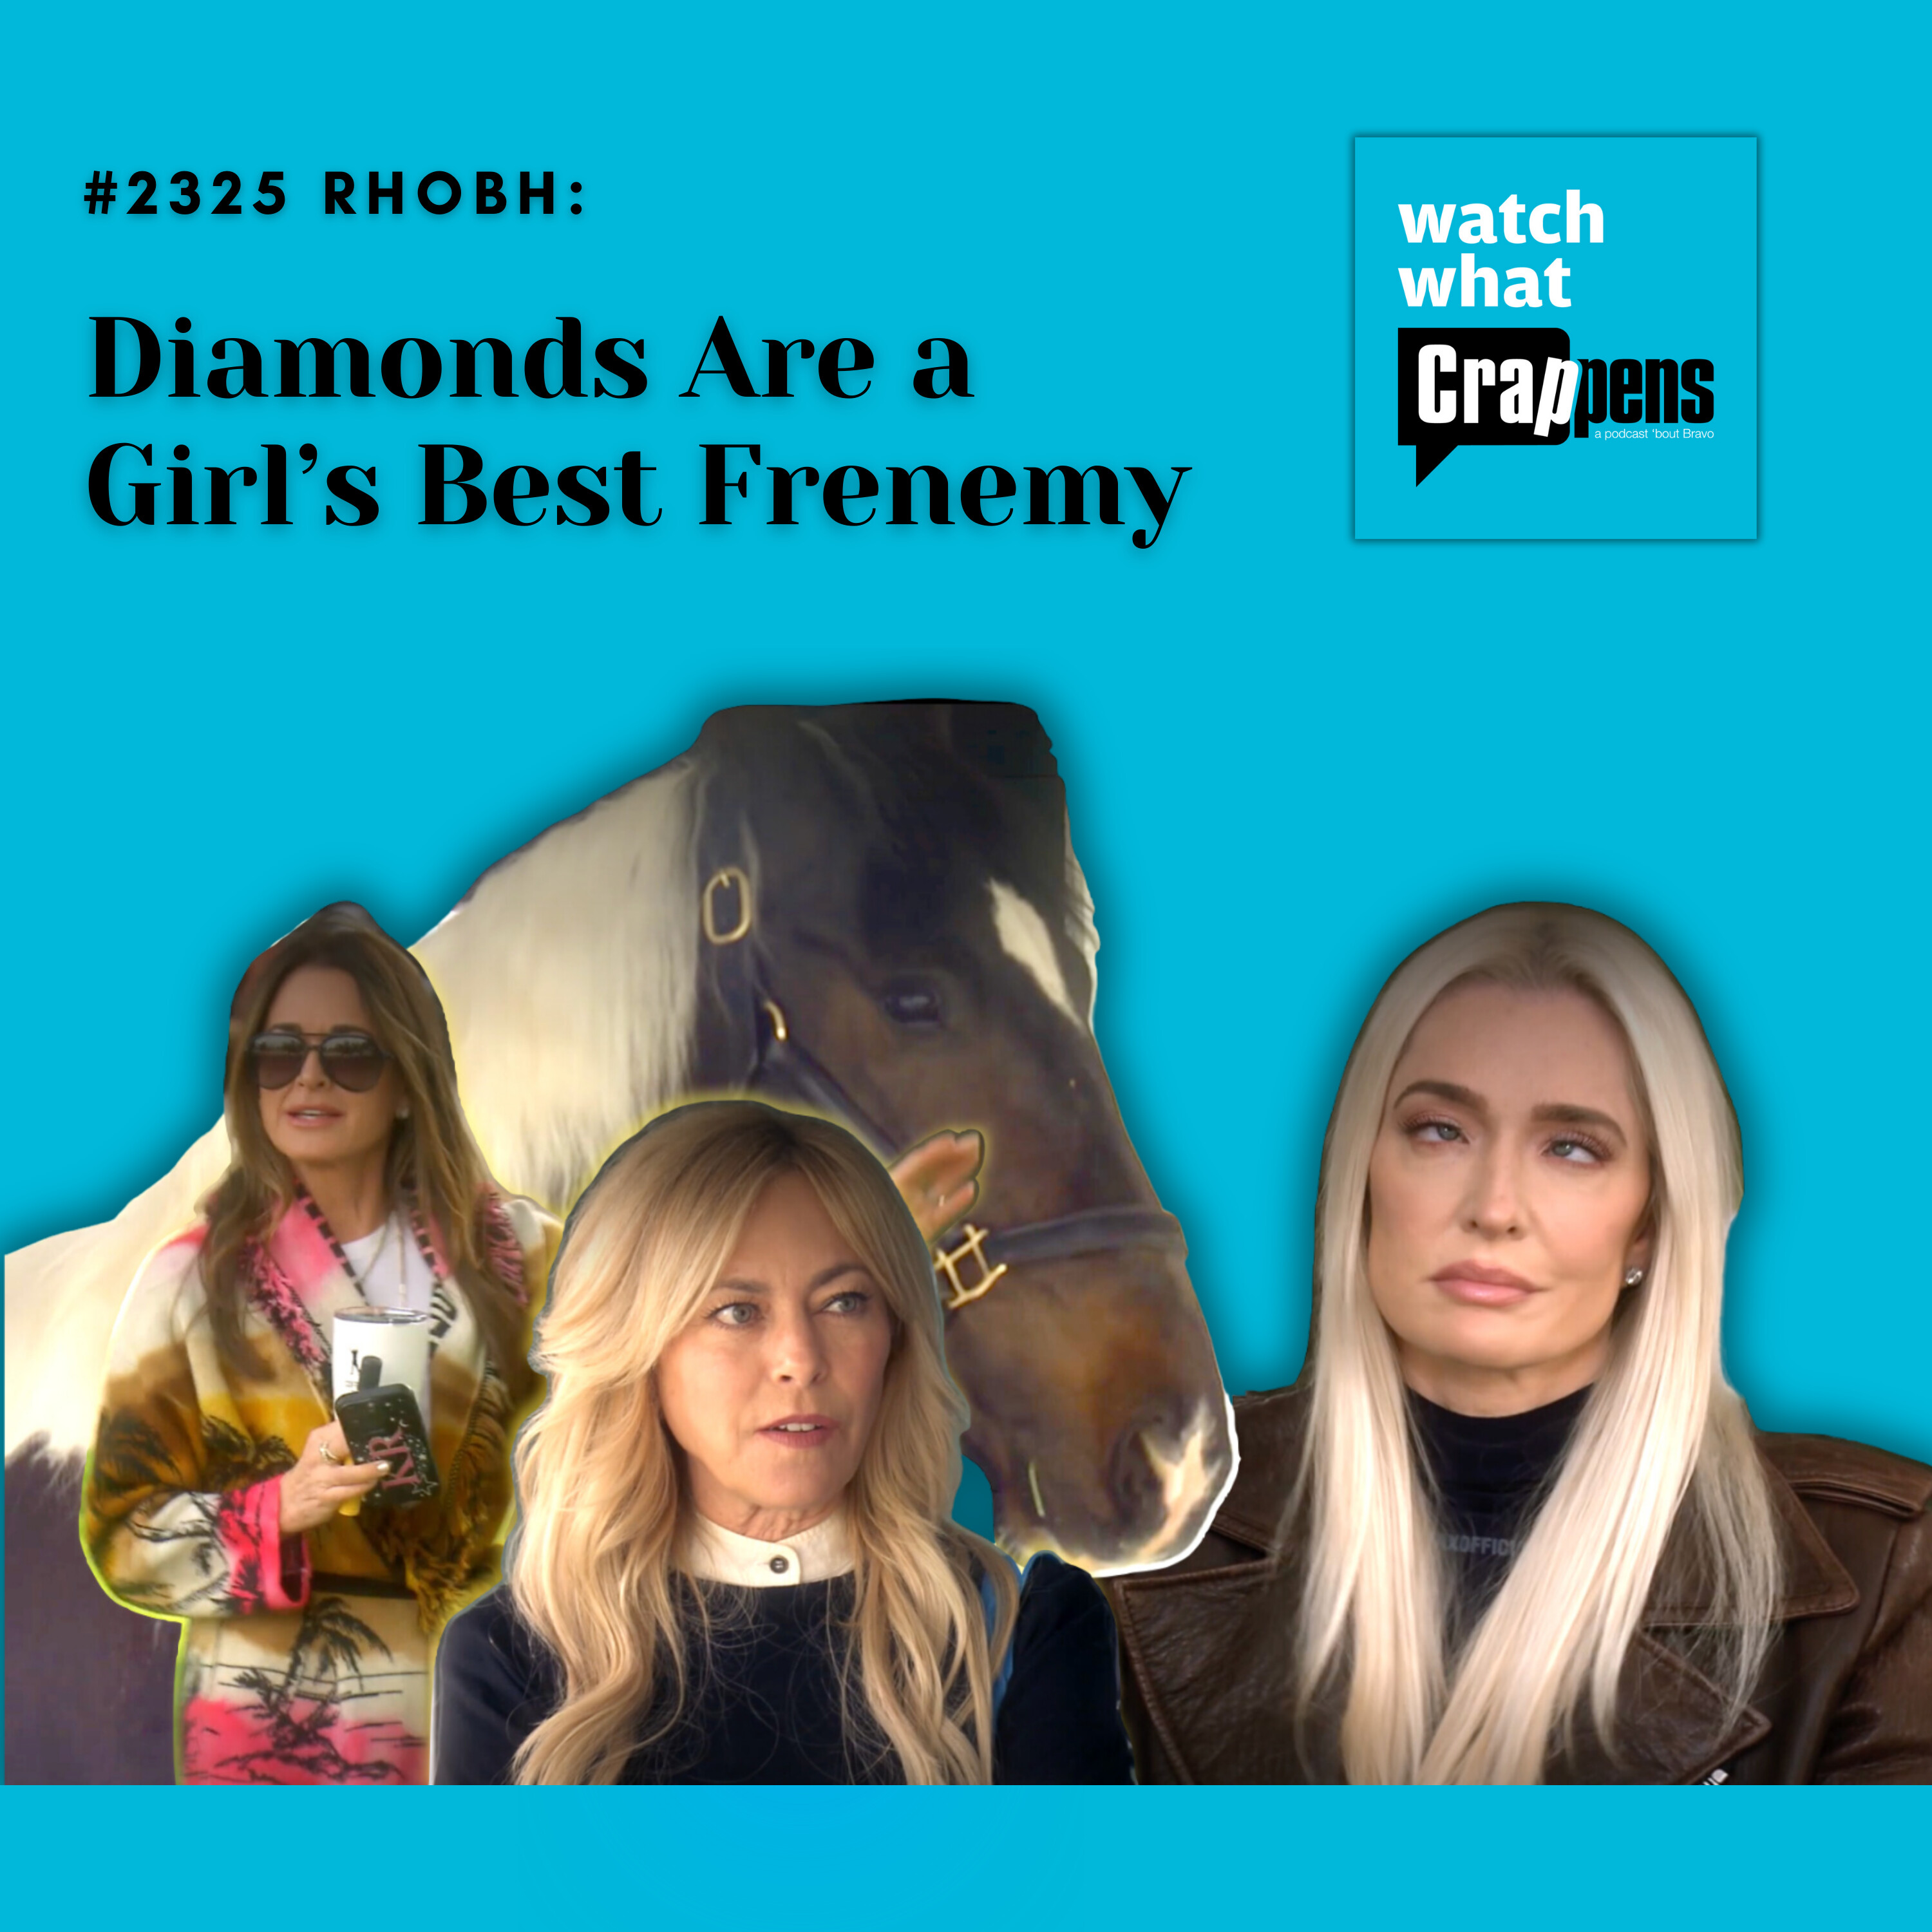 #2325 RHOBH: Diamonds Are a Girl’s Best Frenemy